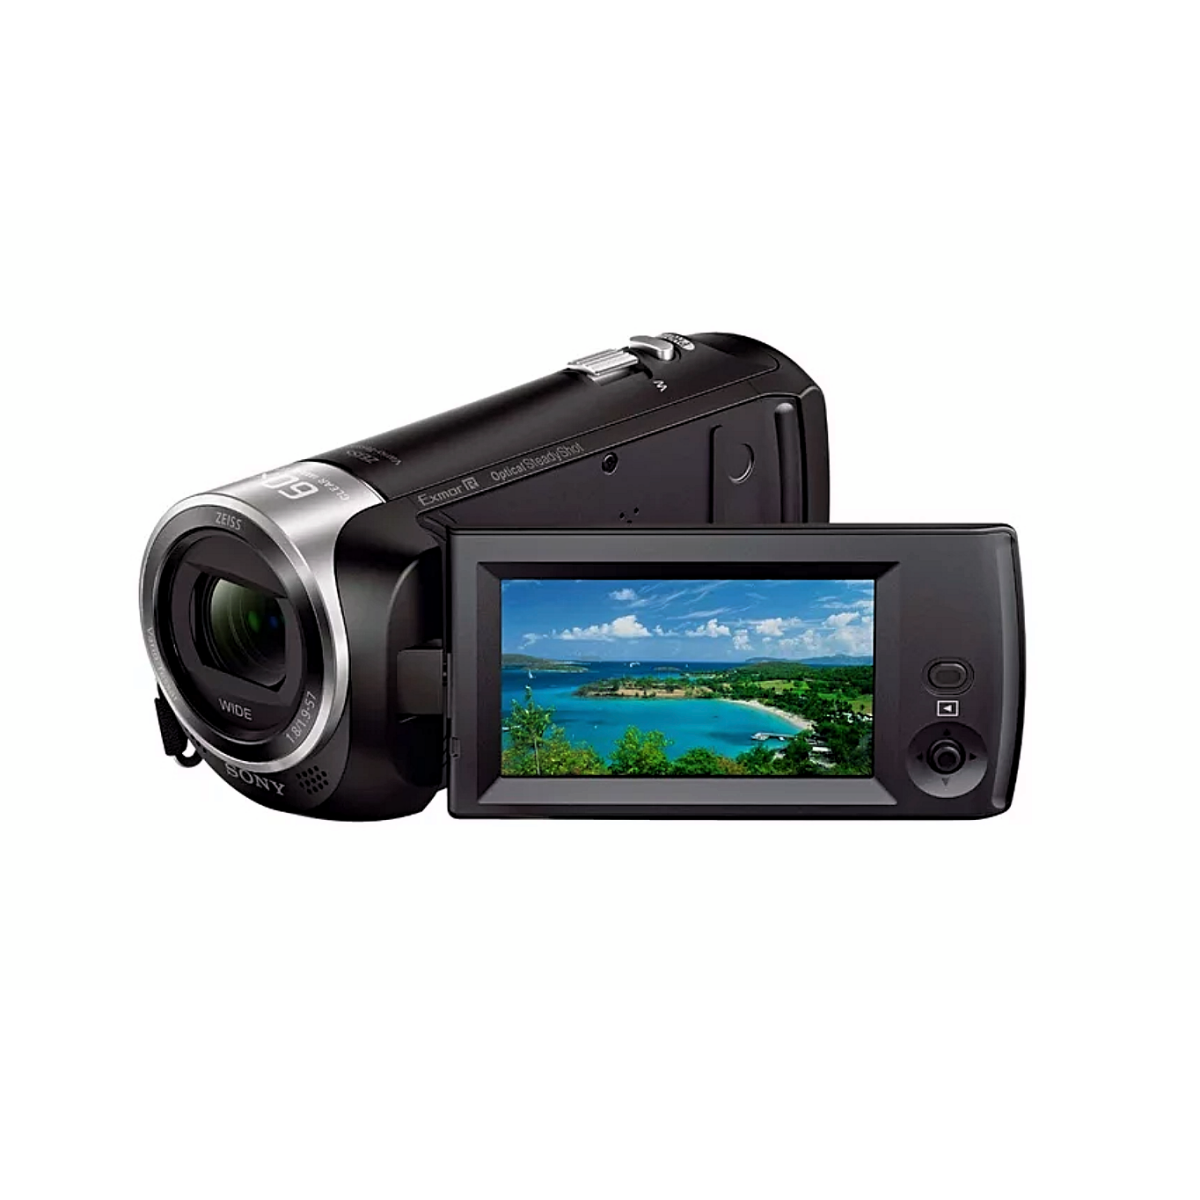 A Sony HDR-CX405 Handycam